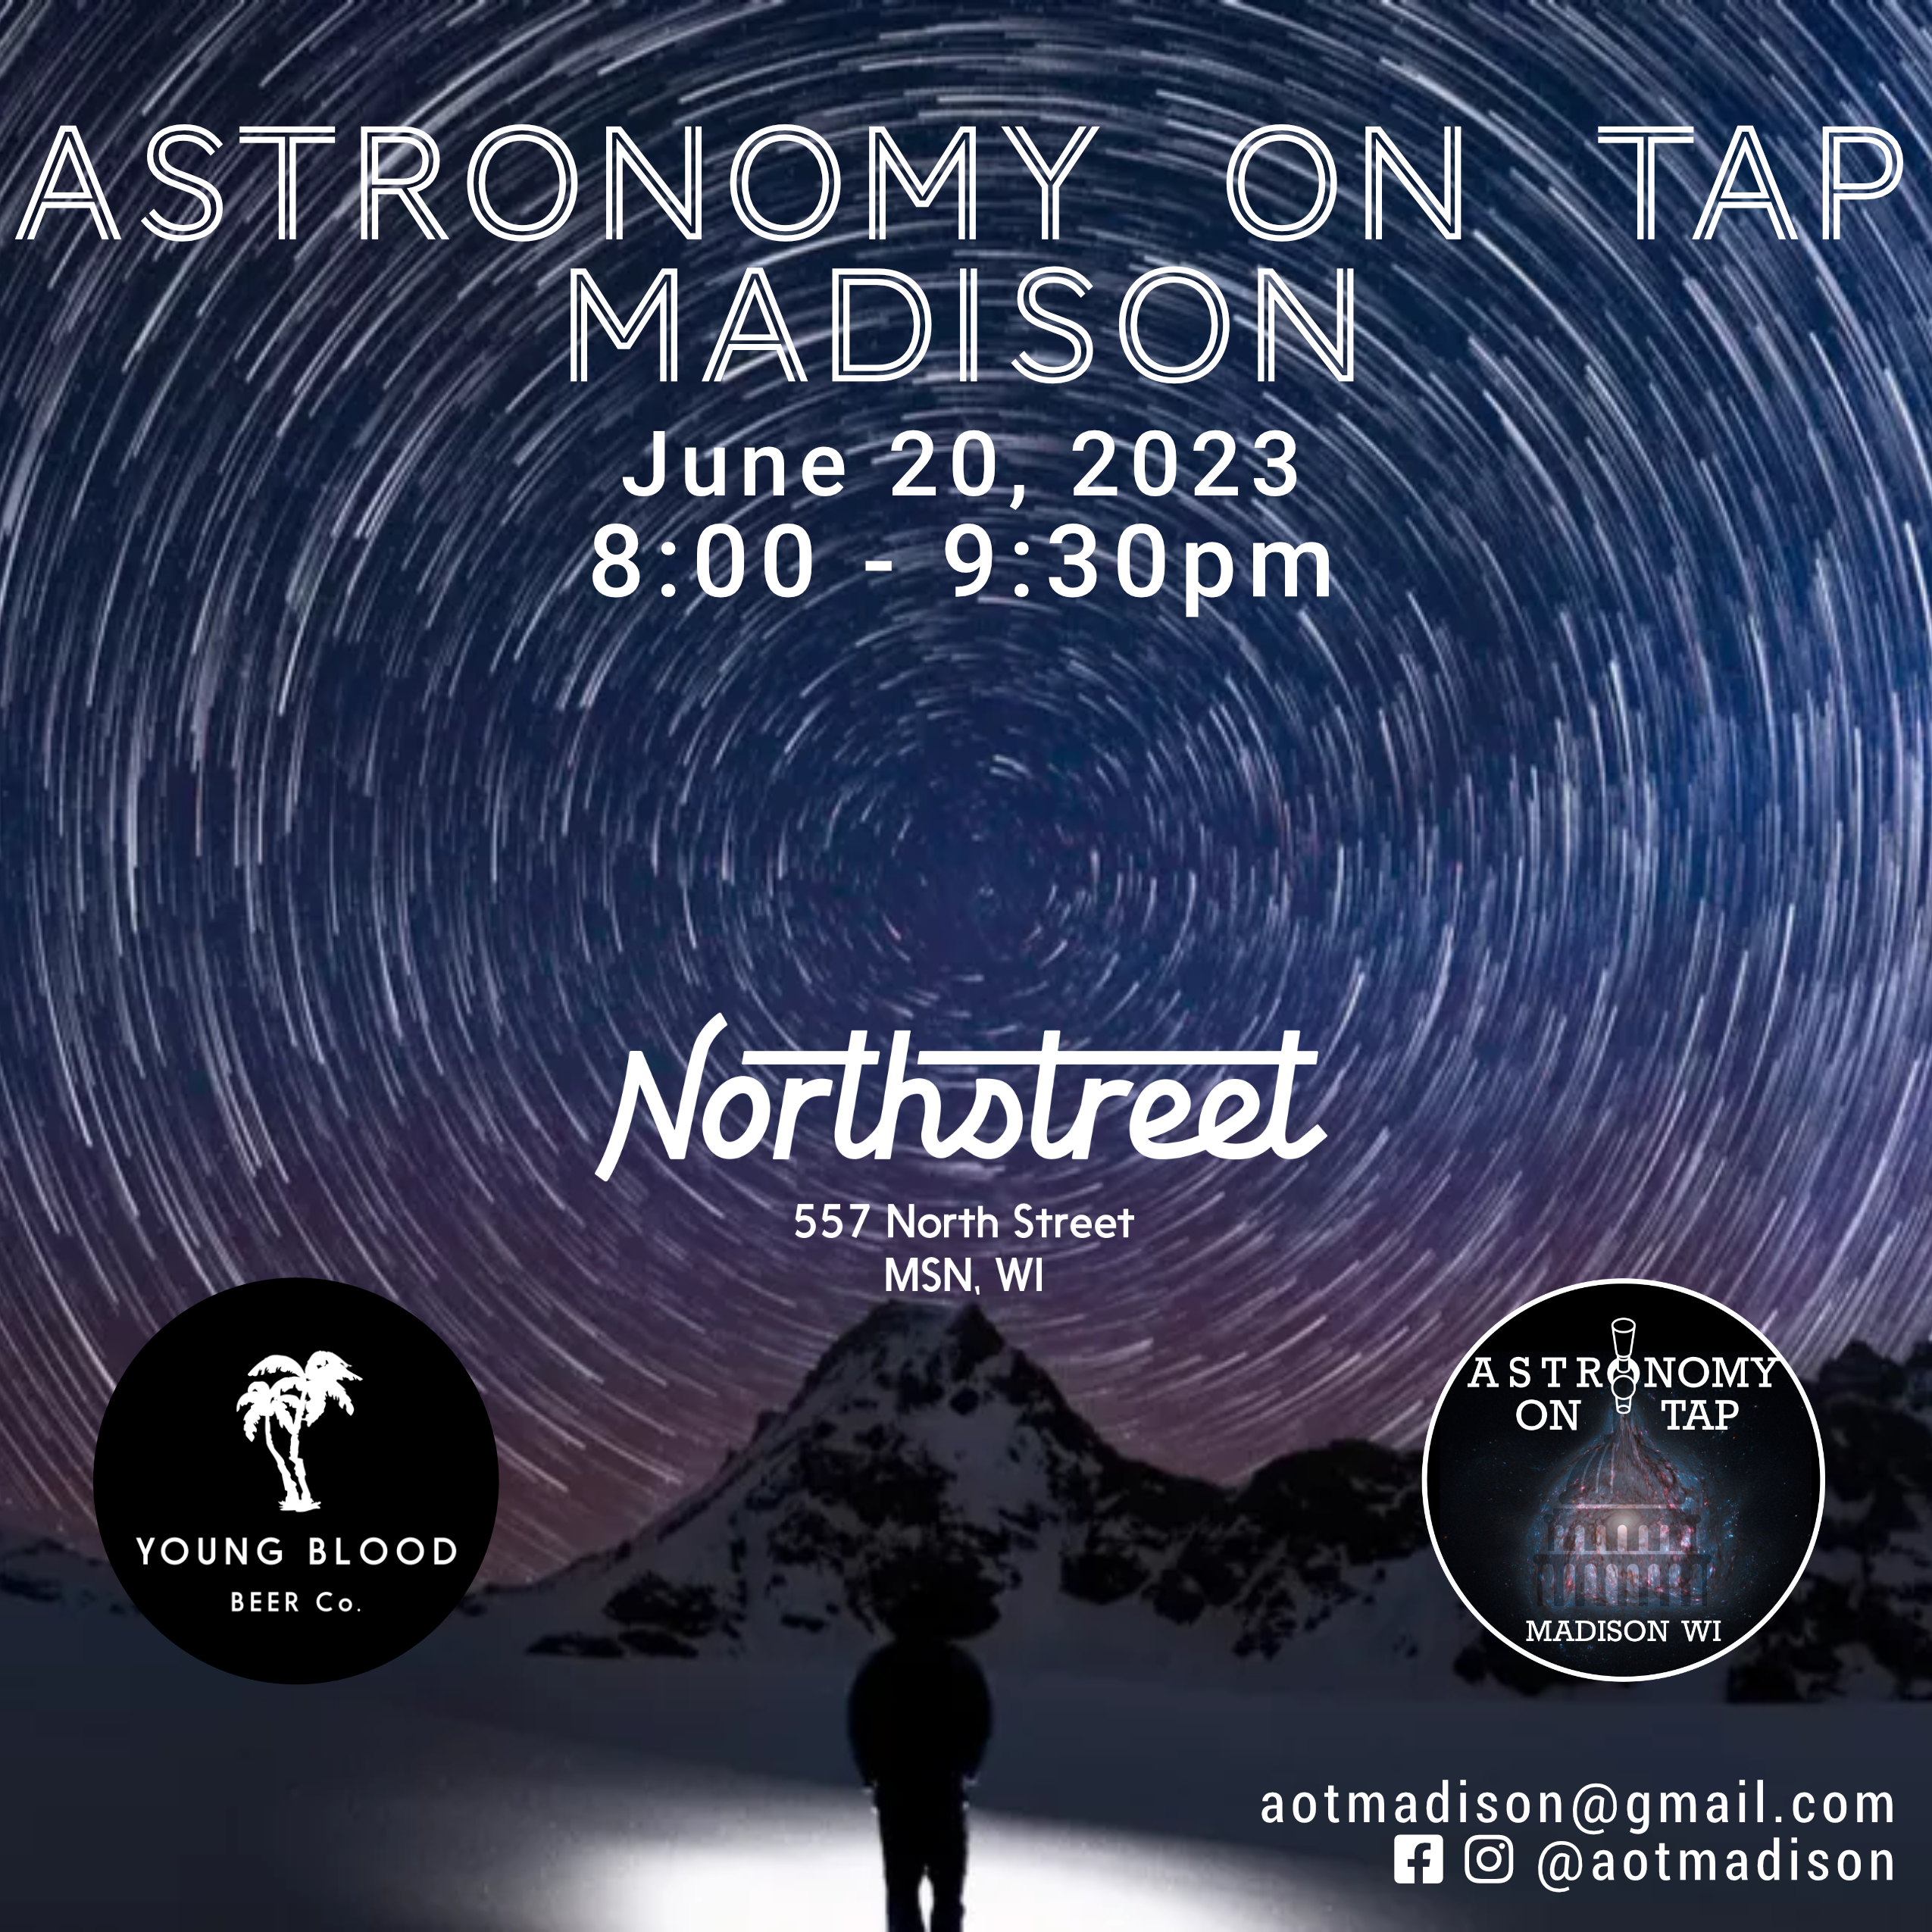 Title: Astronomy on Tap Madison June 20th, 2023 7-8:30pm at the top of the image in the background shows the star trails as the sky moves over a short period of a night above a mountain. At bottom is the Northstreet Logo and the AoT Madison logo.